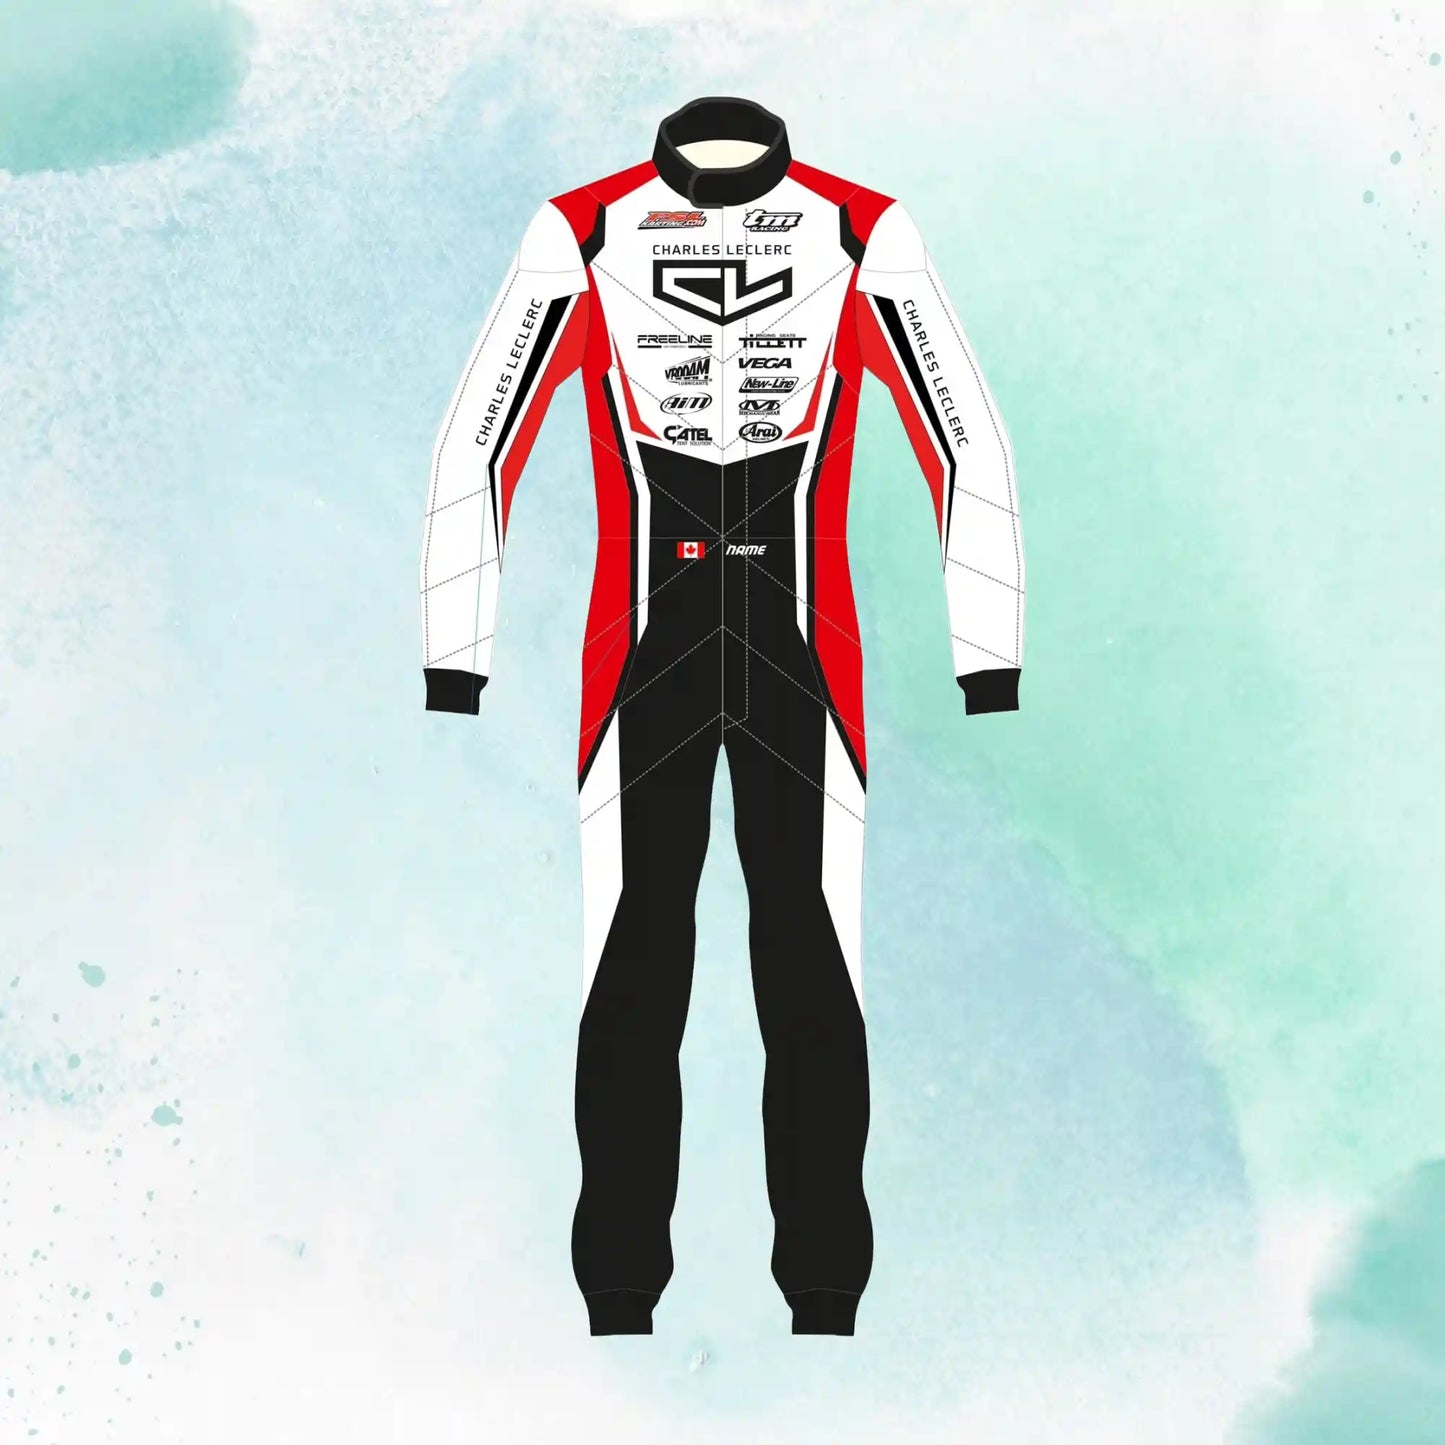 Charles Leclerc 2021 Overall Go Kart Racing Sublimation Printed Suit